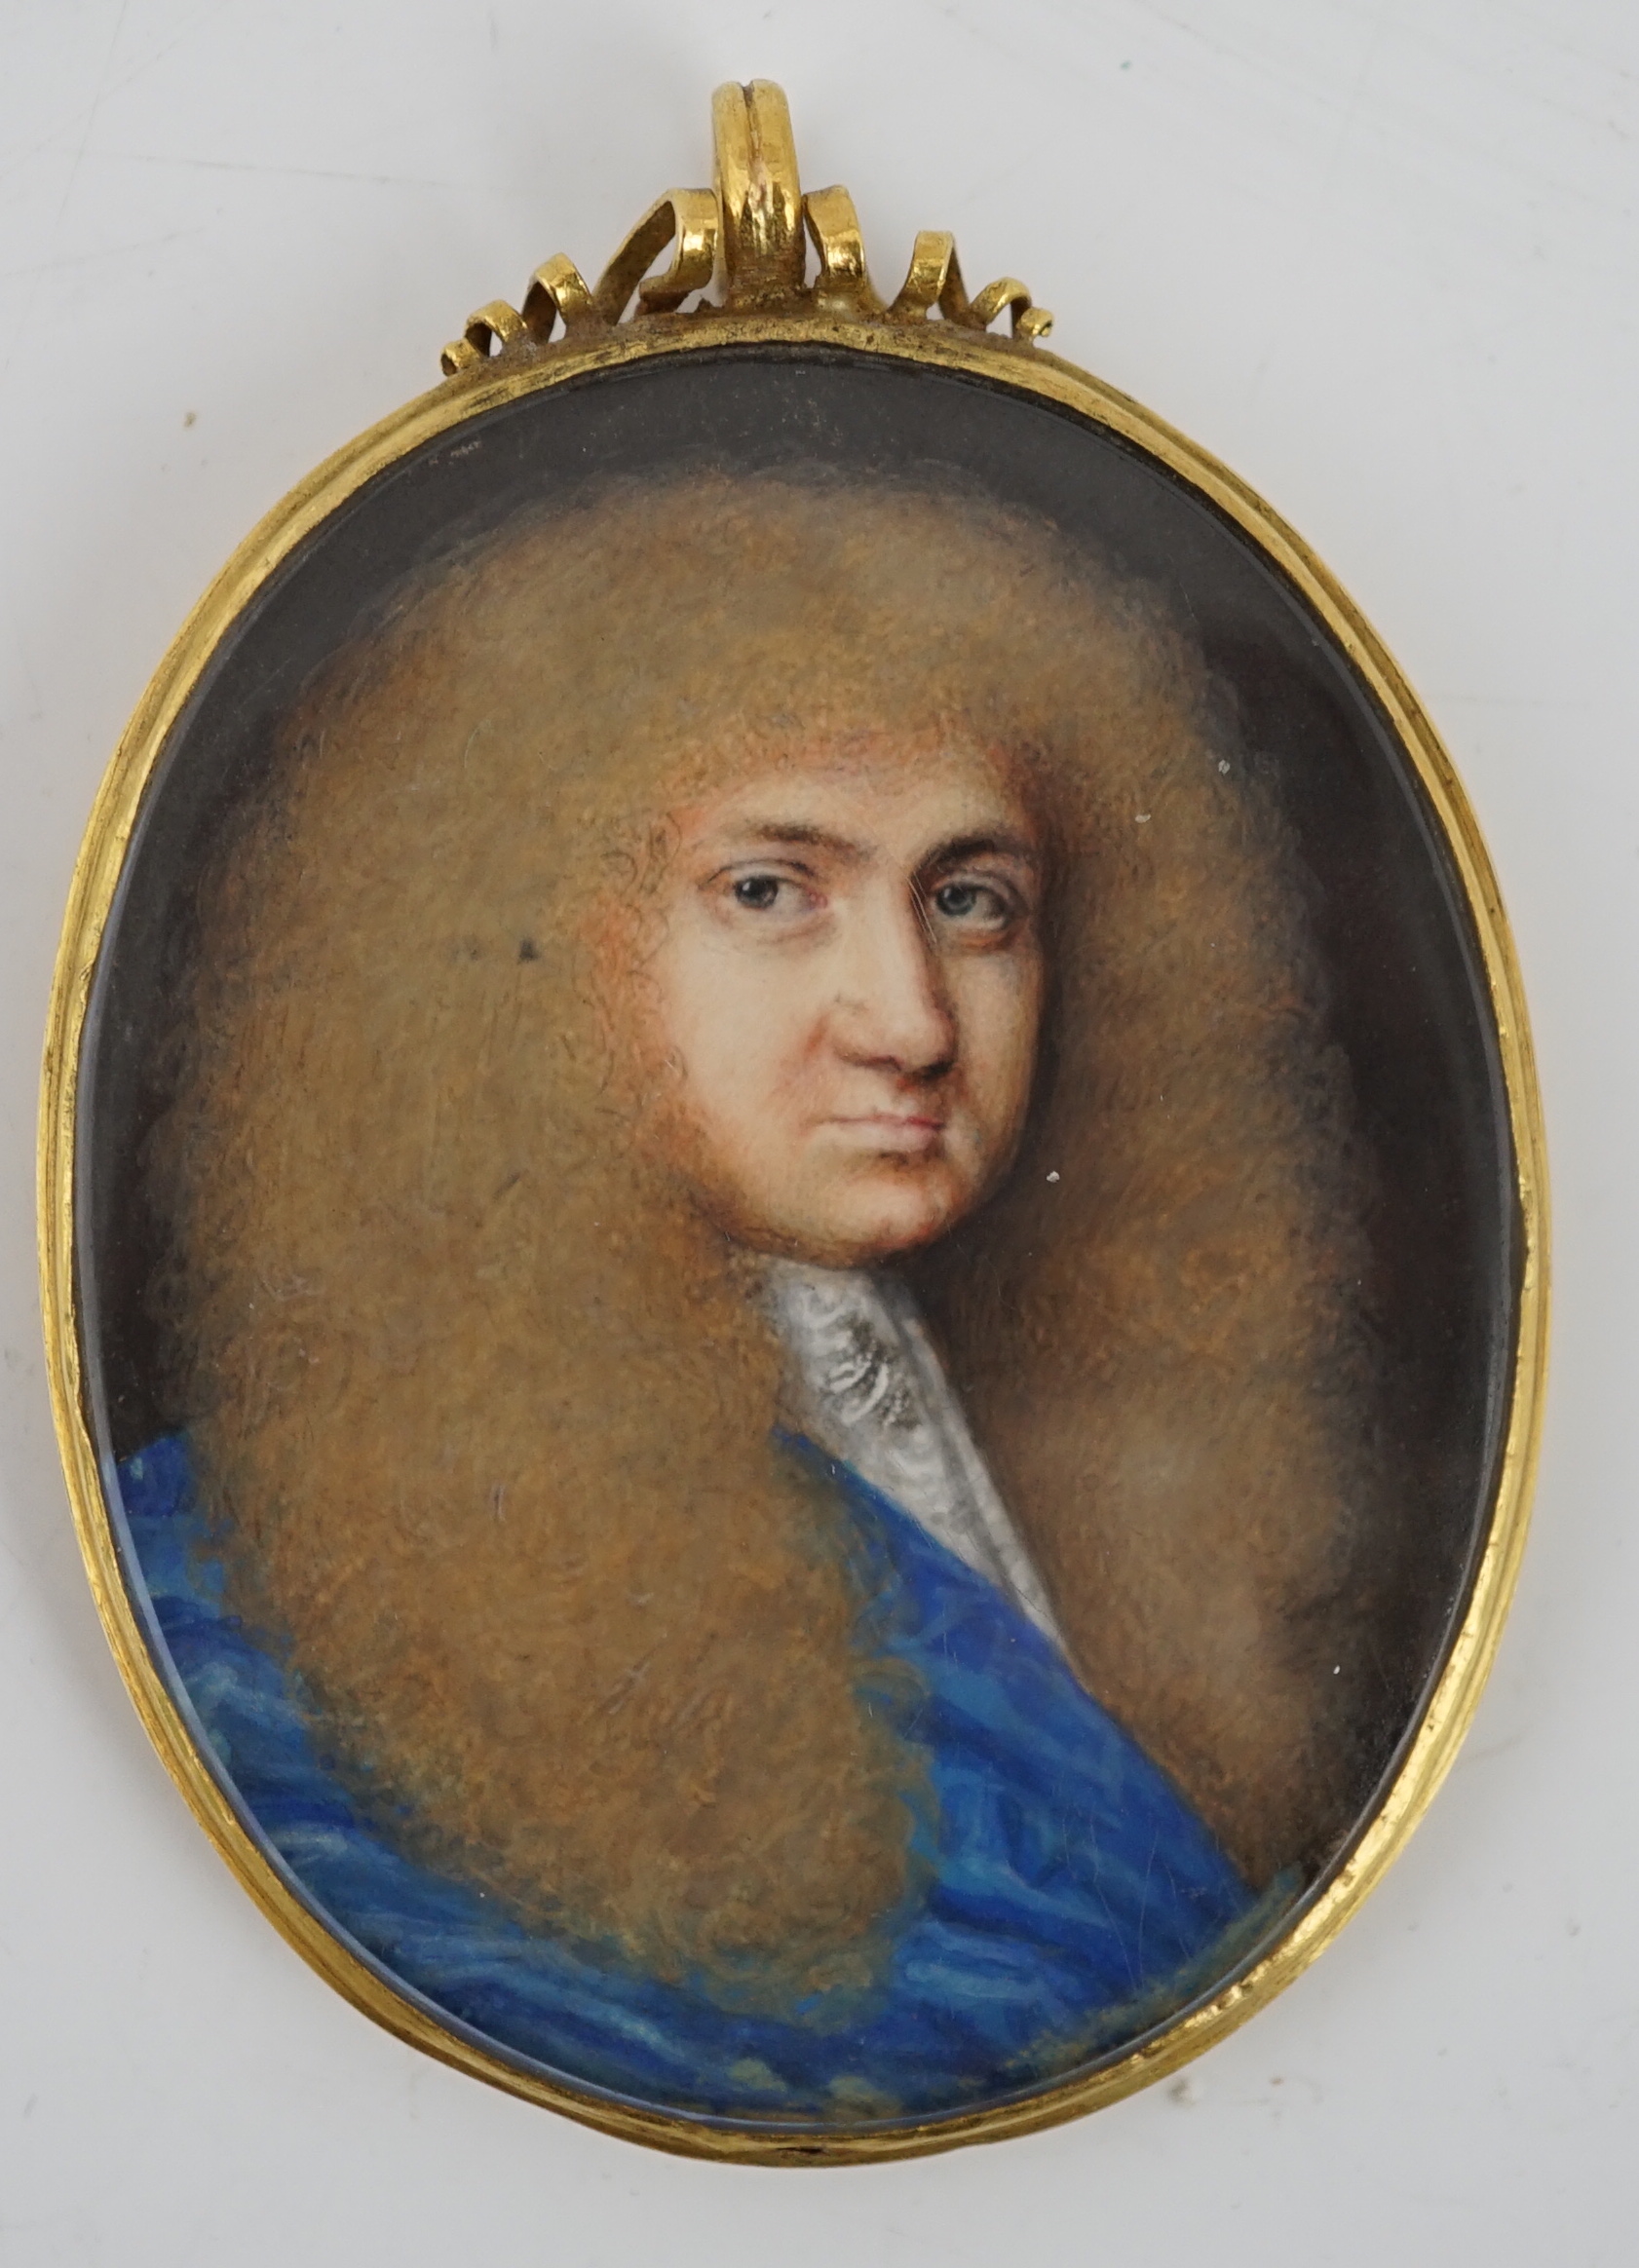 English School circa 1720, Portrait miniature of a gentleman, oil on ivory, 5.3 x 4.1cm. CITES Submission reference VNHAAGRT